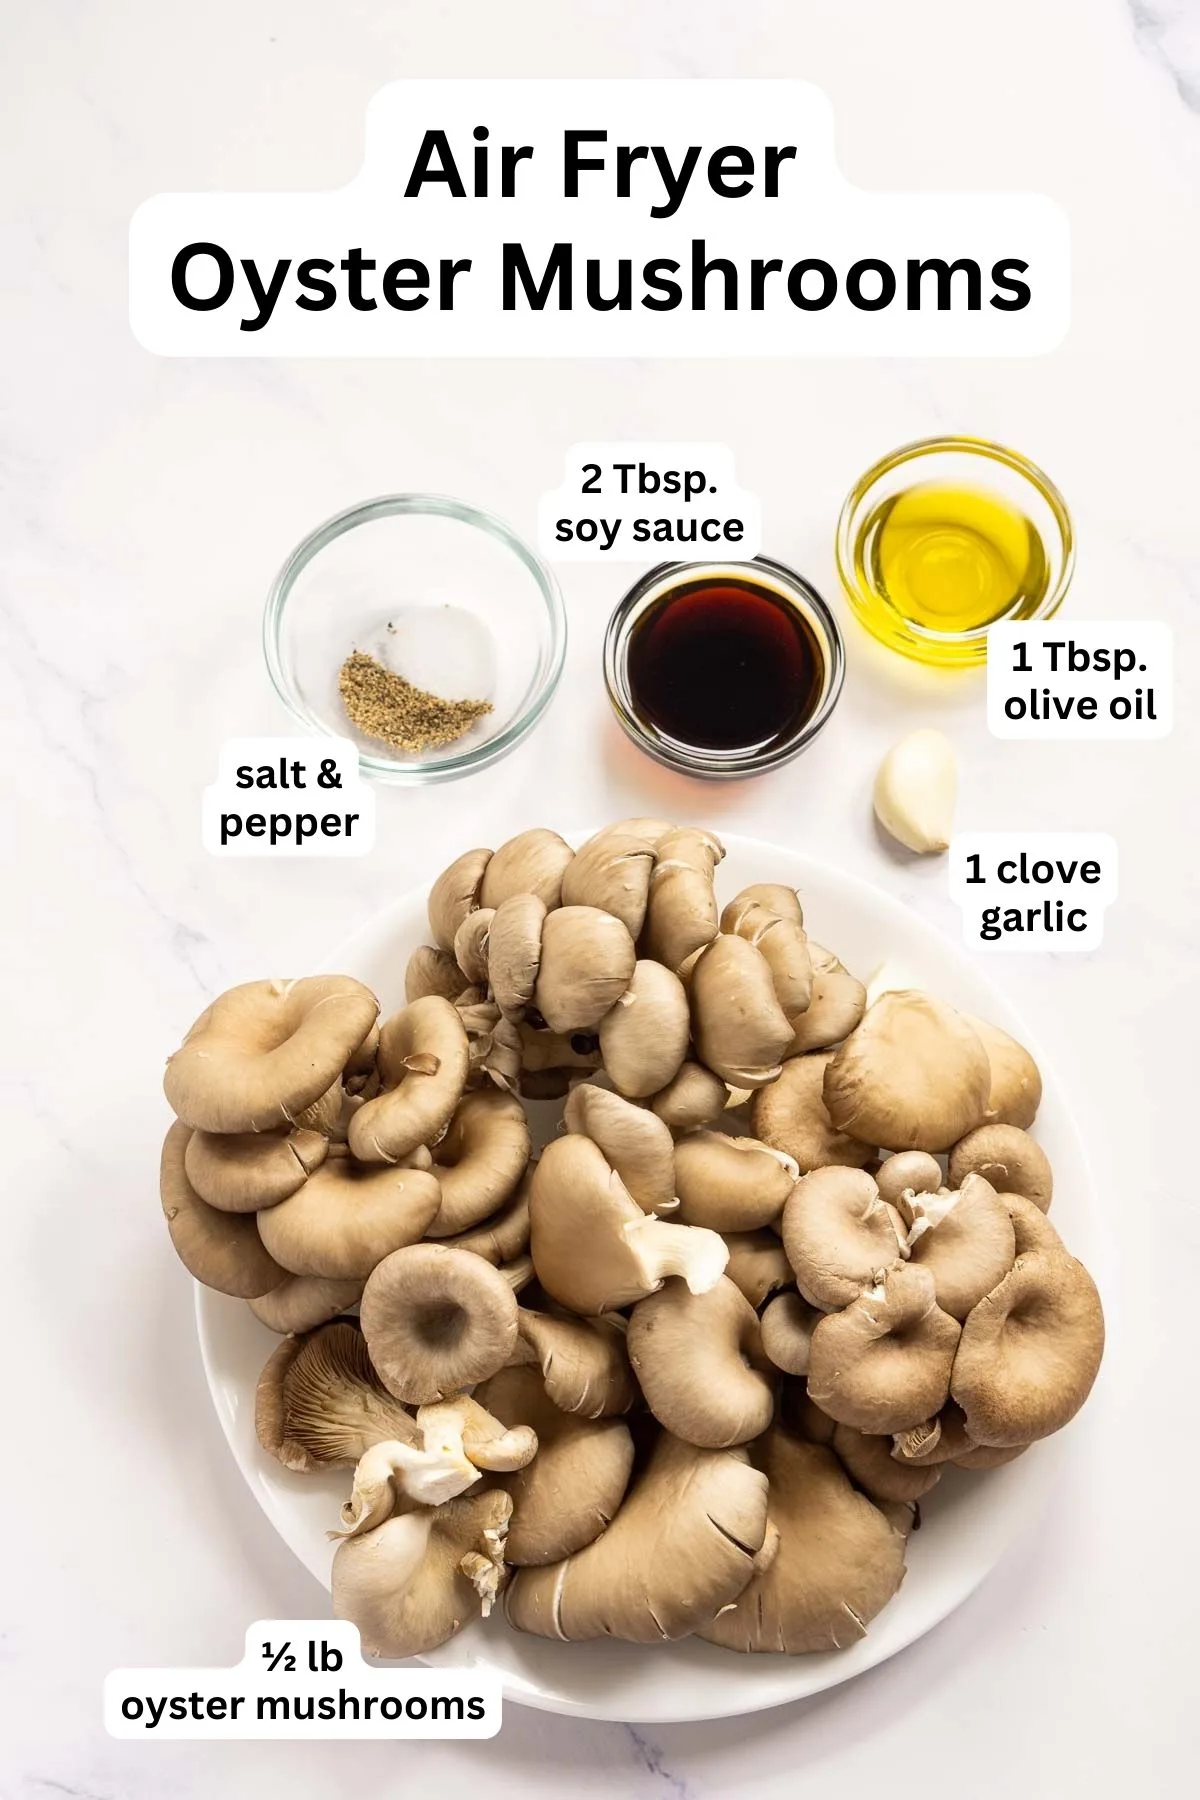 Ingredients to cook oyster mushrooms